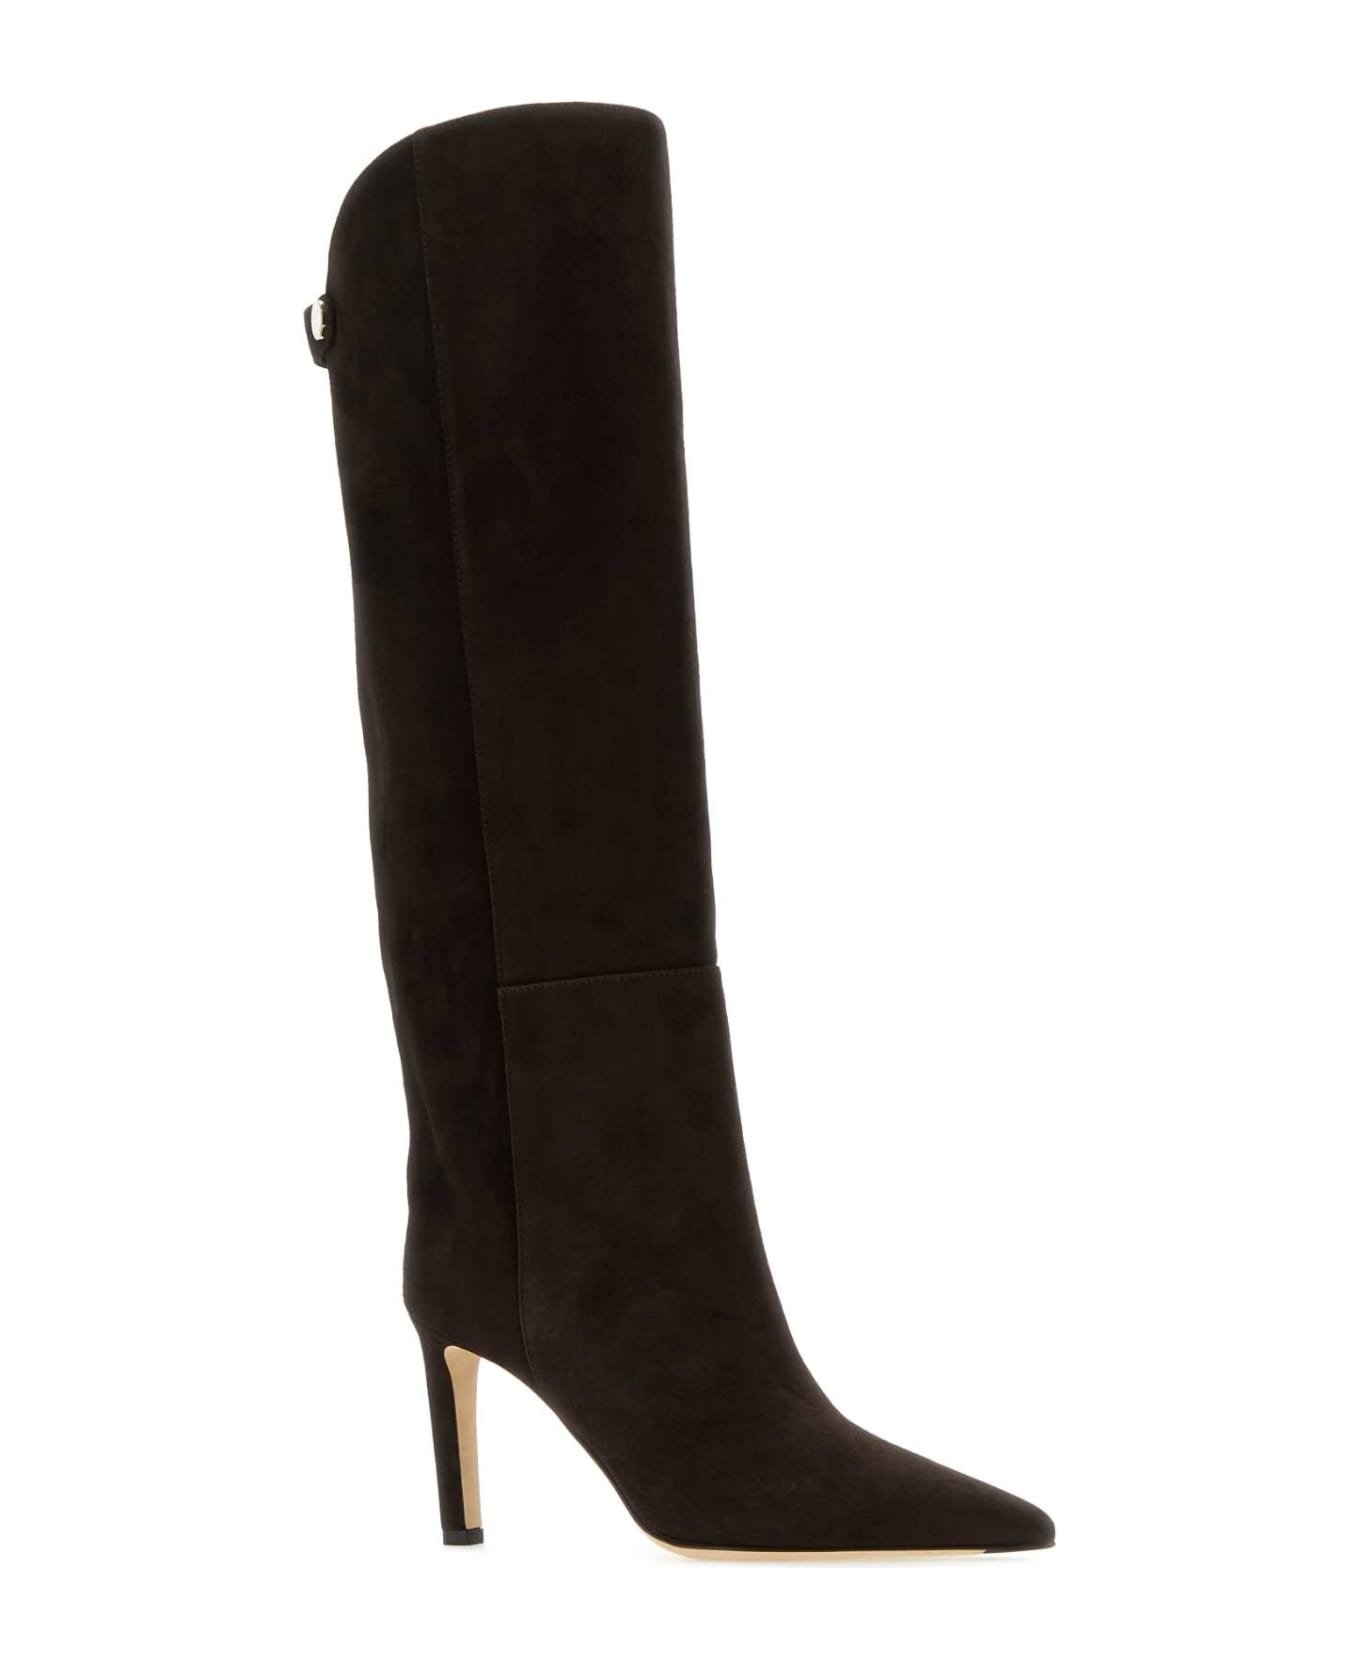 Jimmy Choo Chocolate Suede Alizze Boots - COFFEE